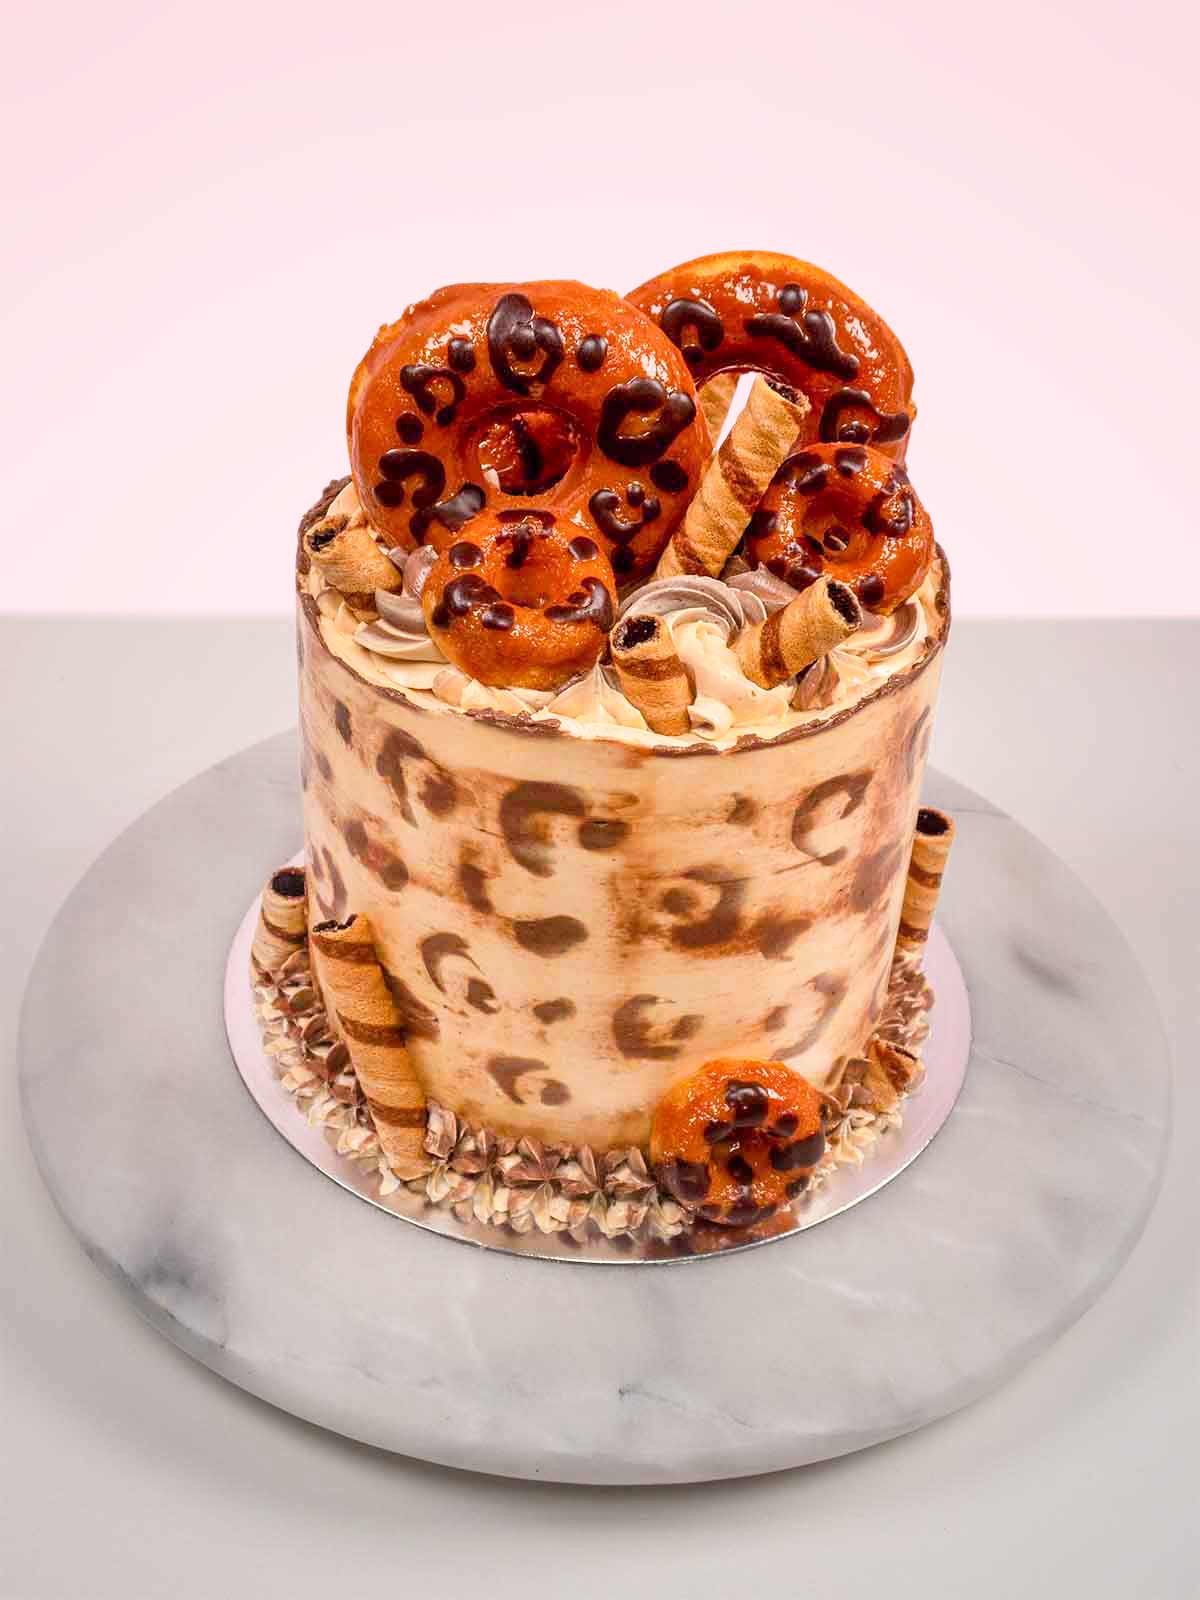 Leopard Print Cake to Buy